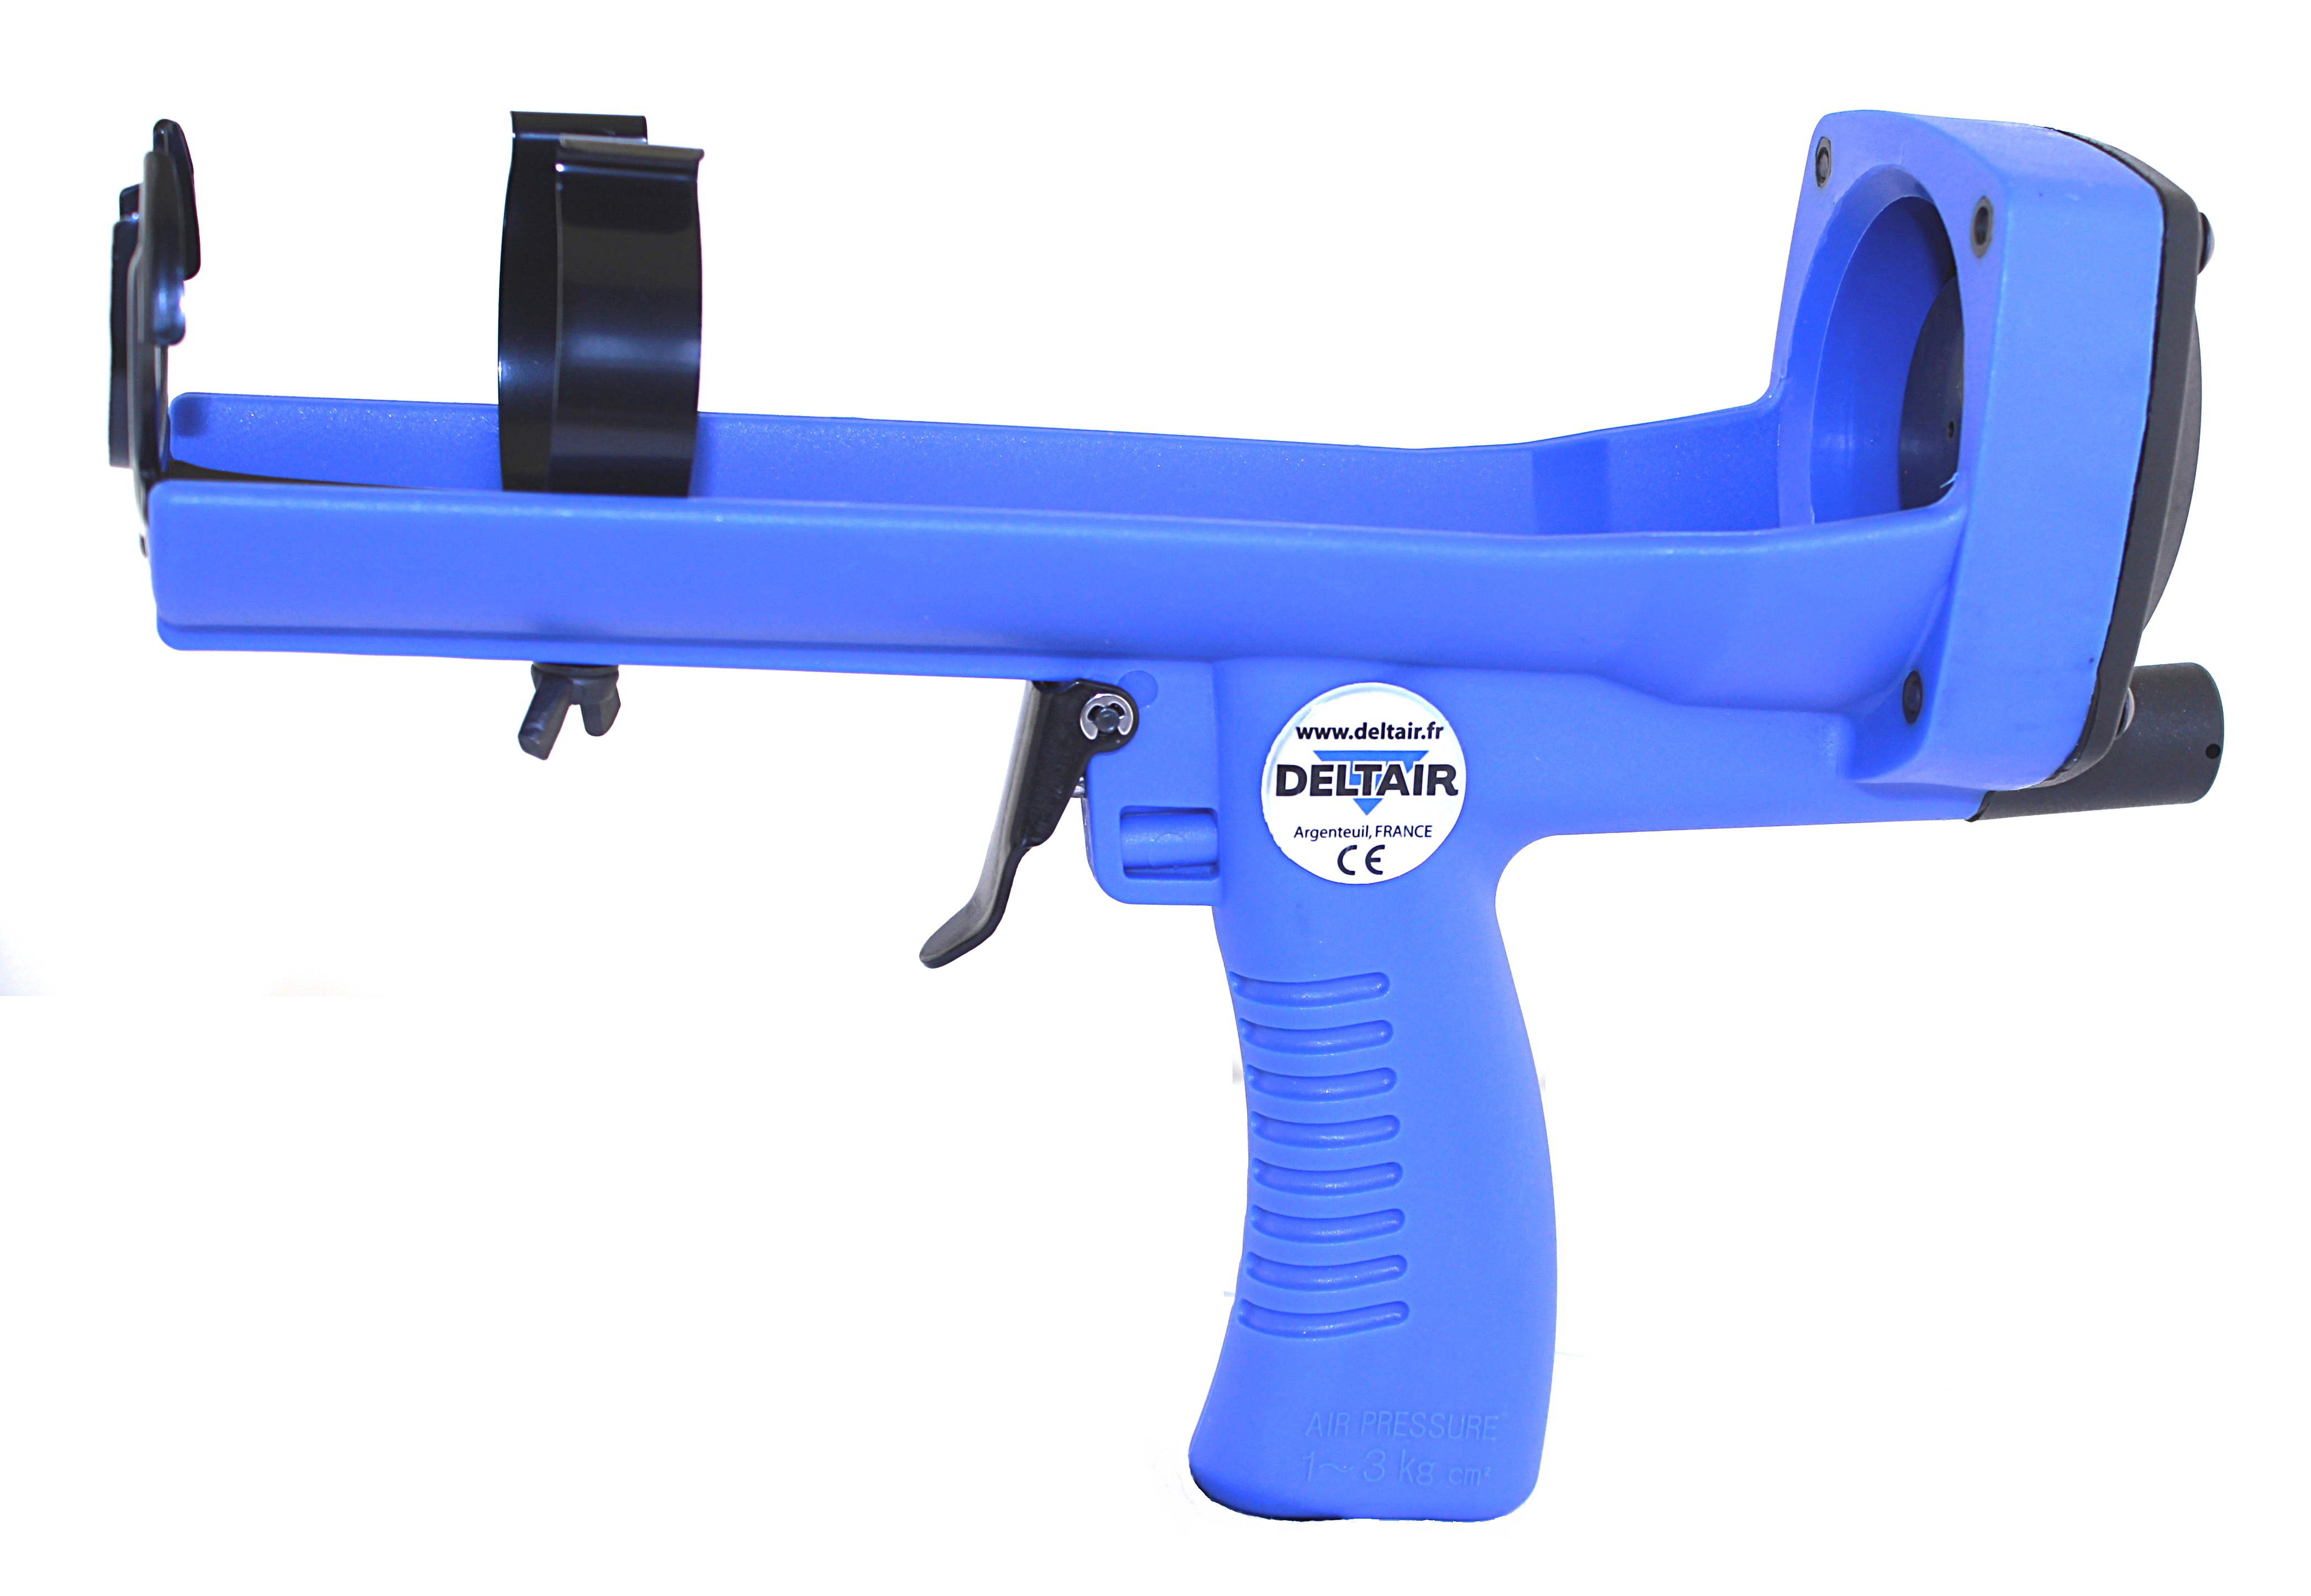 http://deltair.fr/wp-content/uploads/2018/10/PS92B-Pistolet-%C3%A0-silicone.jpg